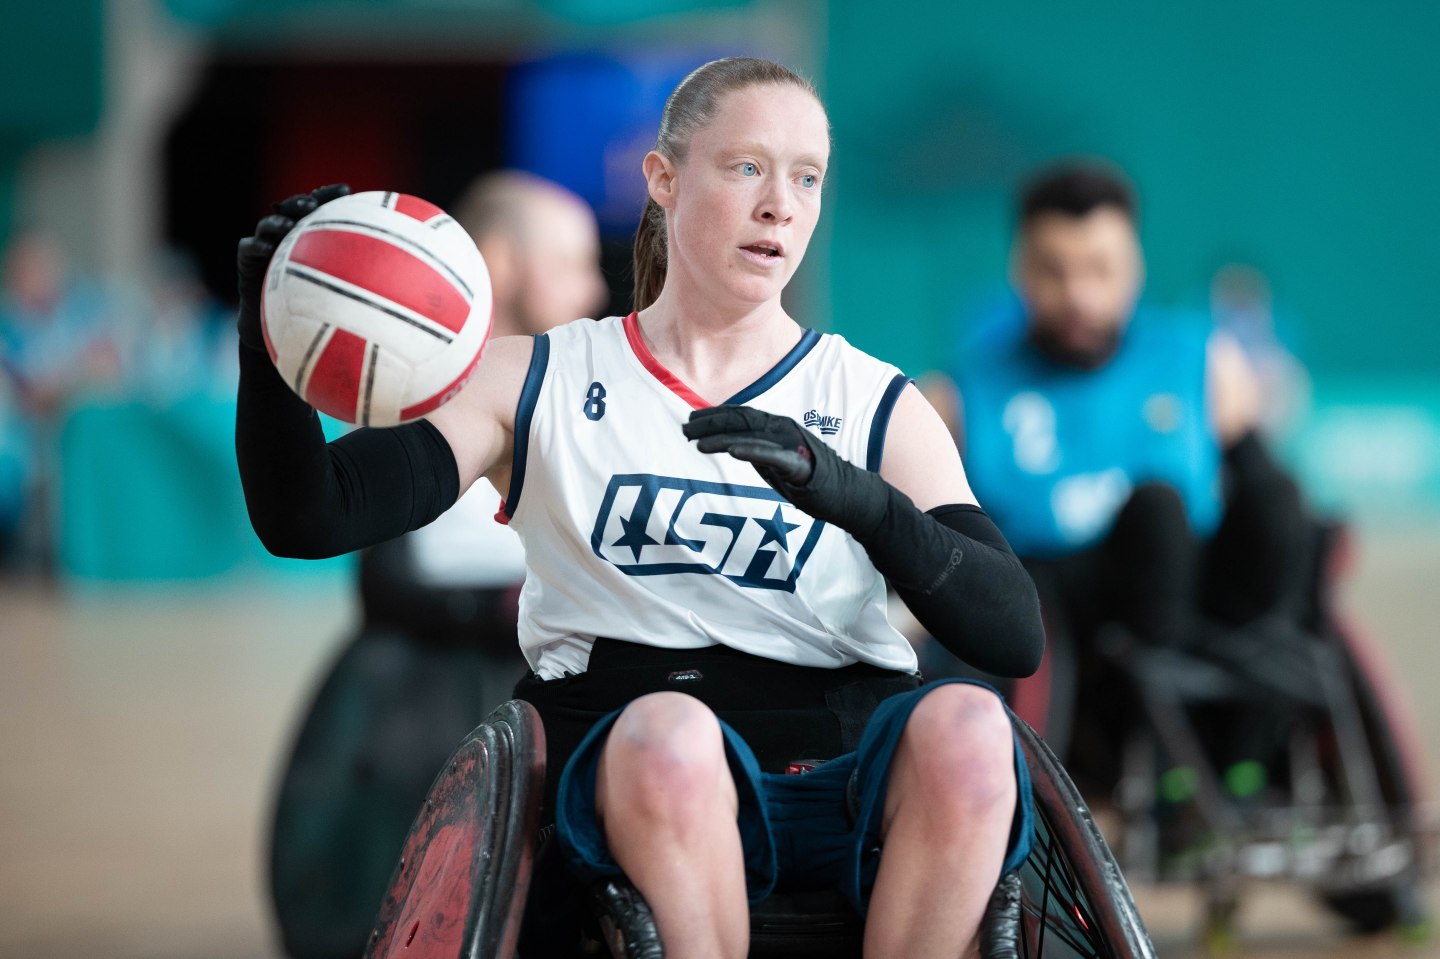 I STAY IN MOTION. I KEEP BUSY:” SARAH ADAM'S JOURNEY TO BEING A KEY PLAYER  FOR TEAM USA WHEELCHAIR RUGBY – Wheelchair Sports Federation Media